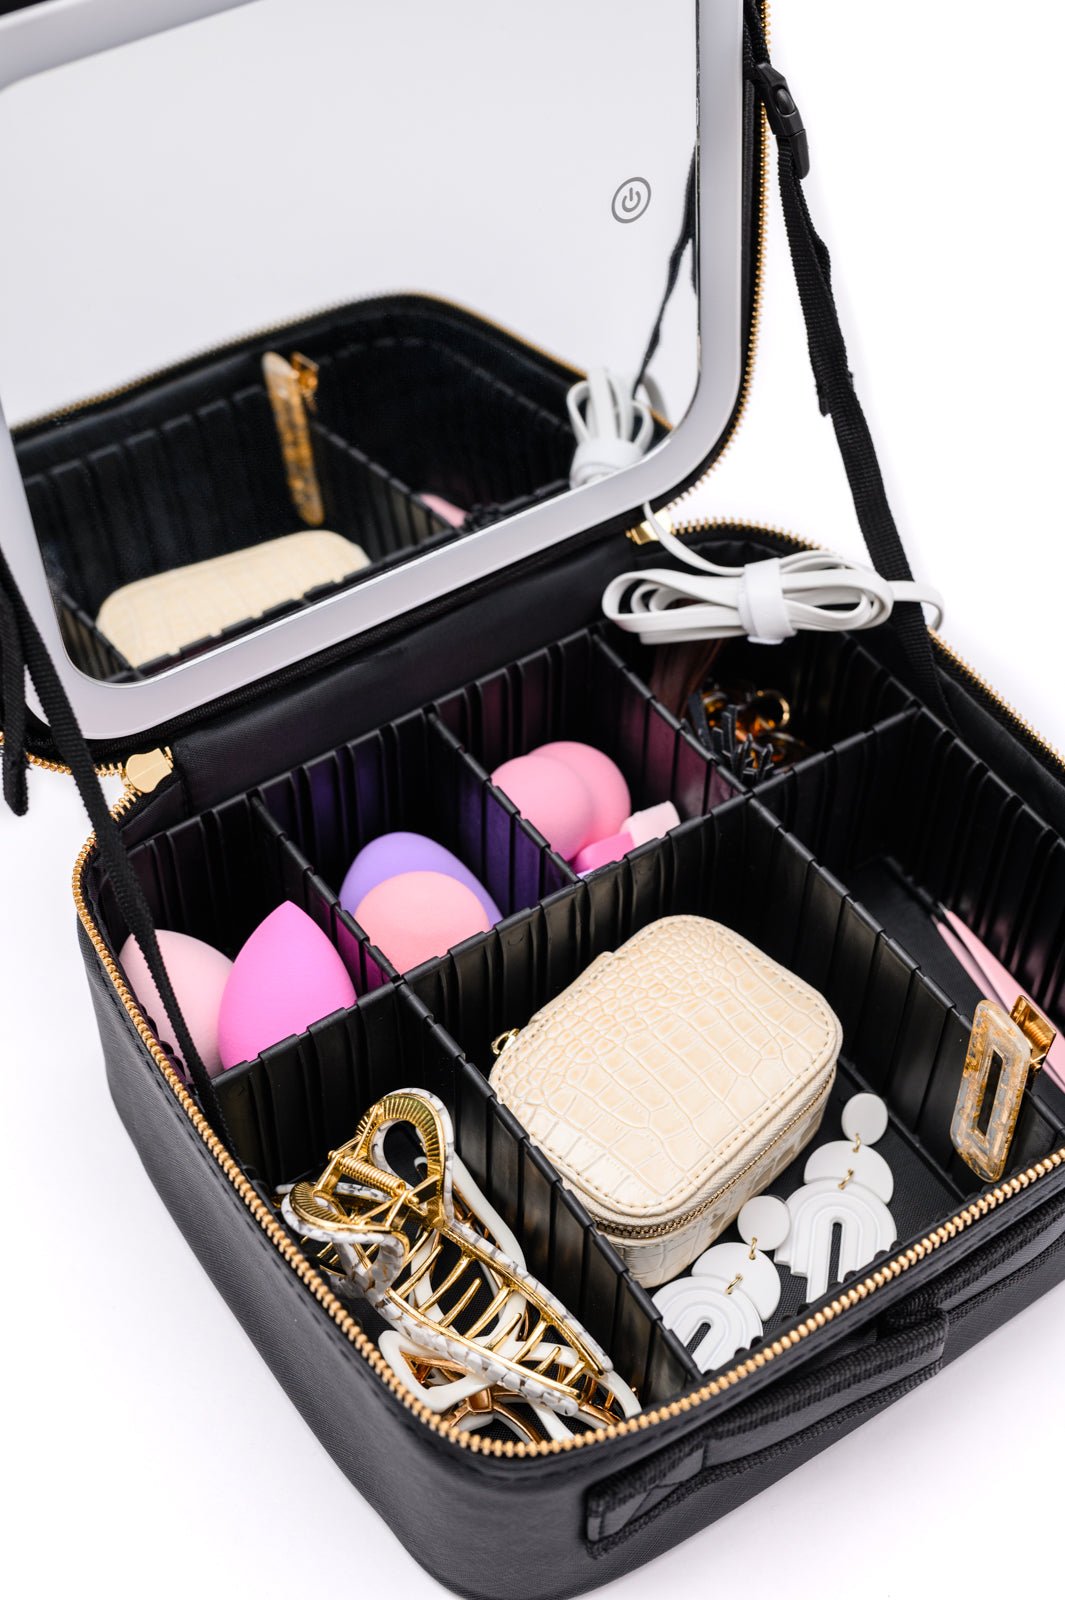 She's All That LED Makeup Case in Black - Happily Ever Atchison Shop Co.